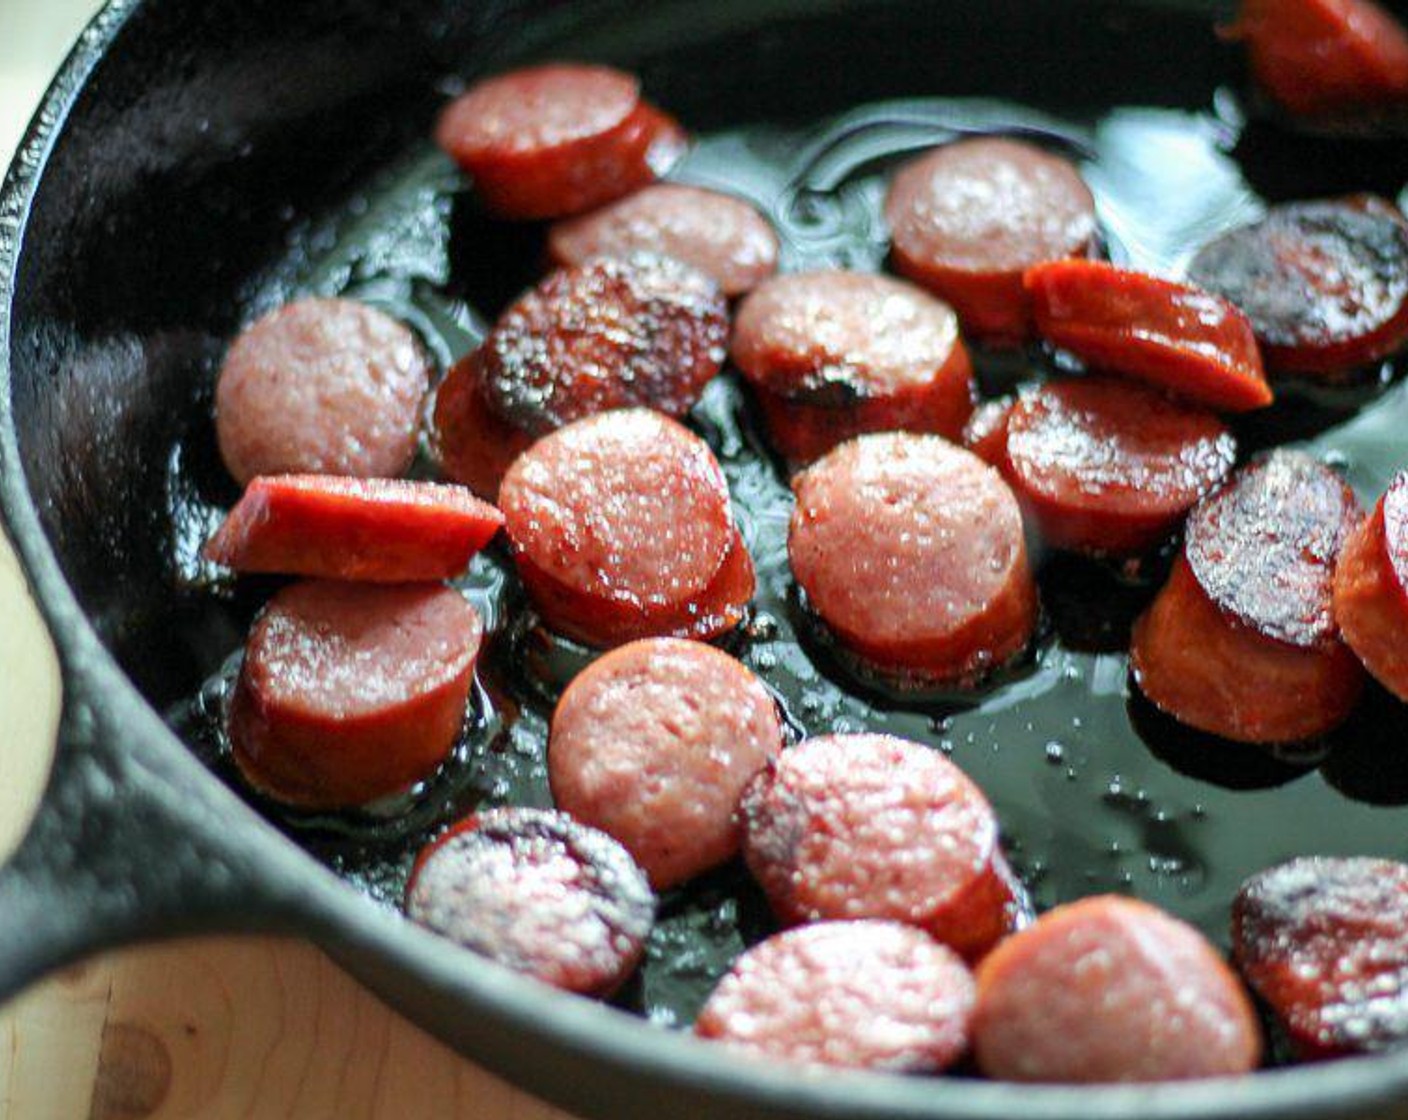 step 1 Heat Olive Oil (1 Tbsp) in a large skillet to medium high. Cut the Smoked Sausage (1 lb) into 1/2-inch sized pieces. Cook in oil until browned.